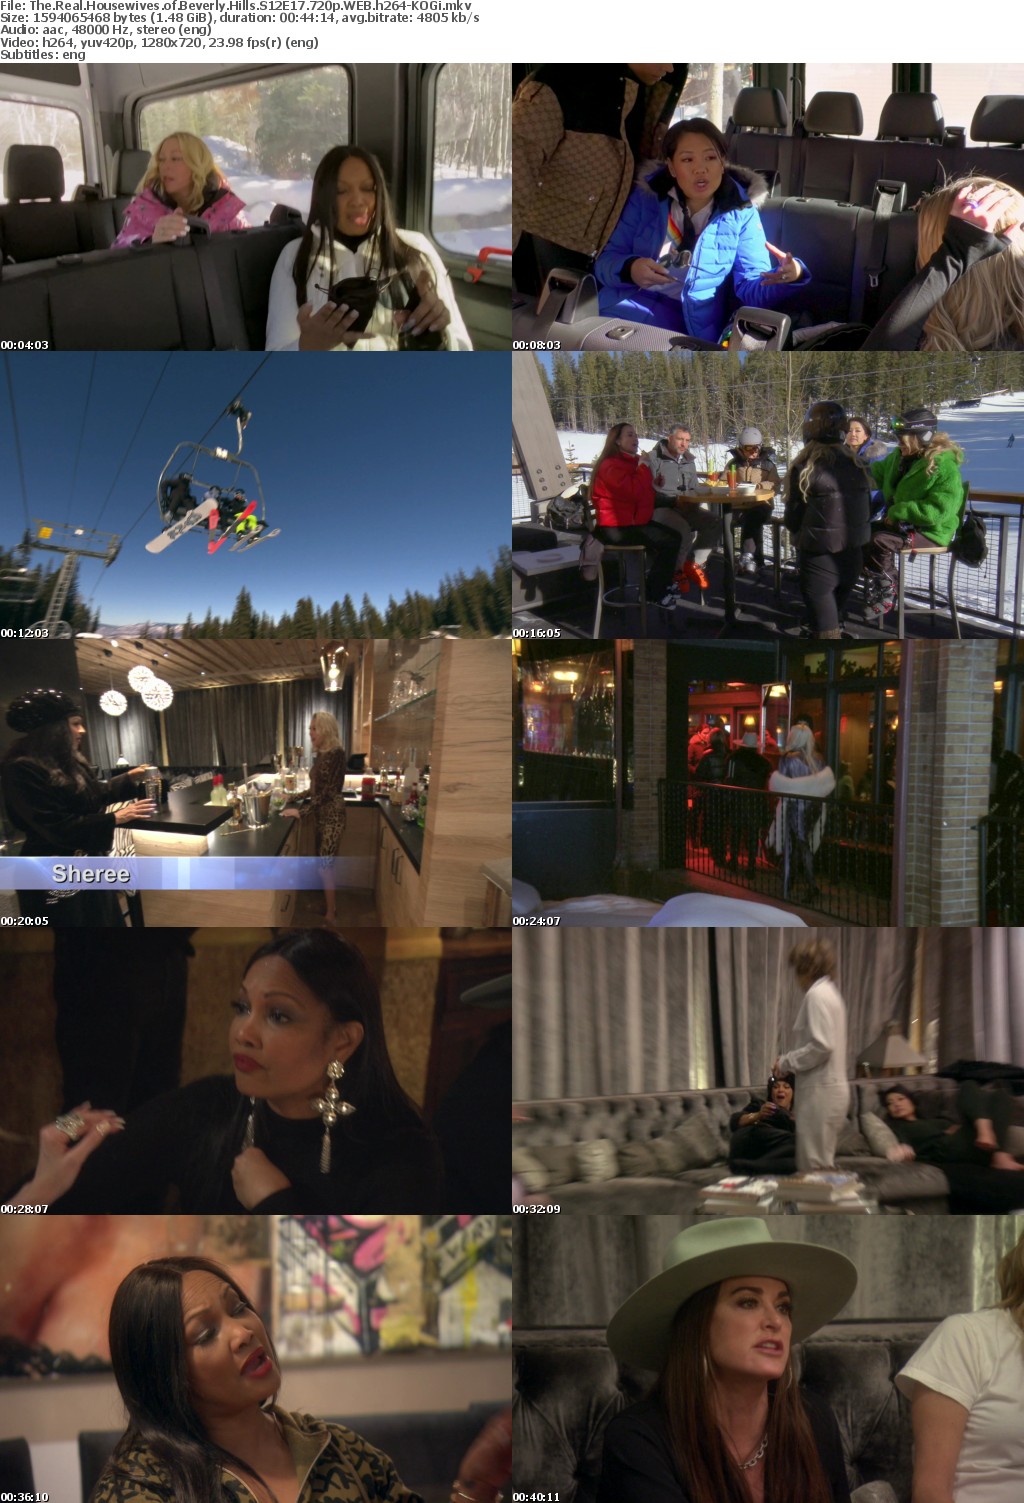 The Real Housewives of Beverly Hills S12E17 720p WEB h264-KOGi